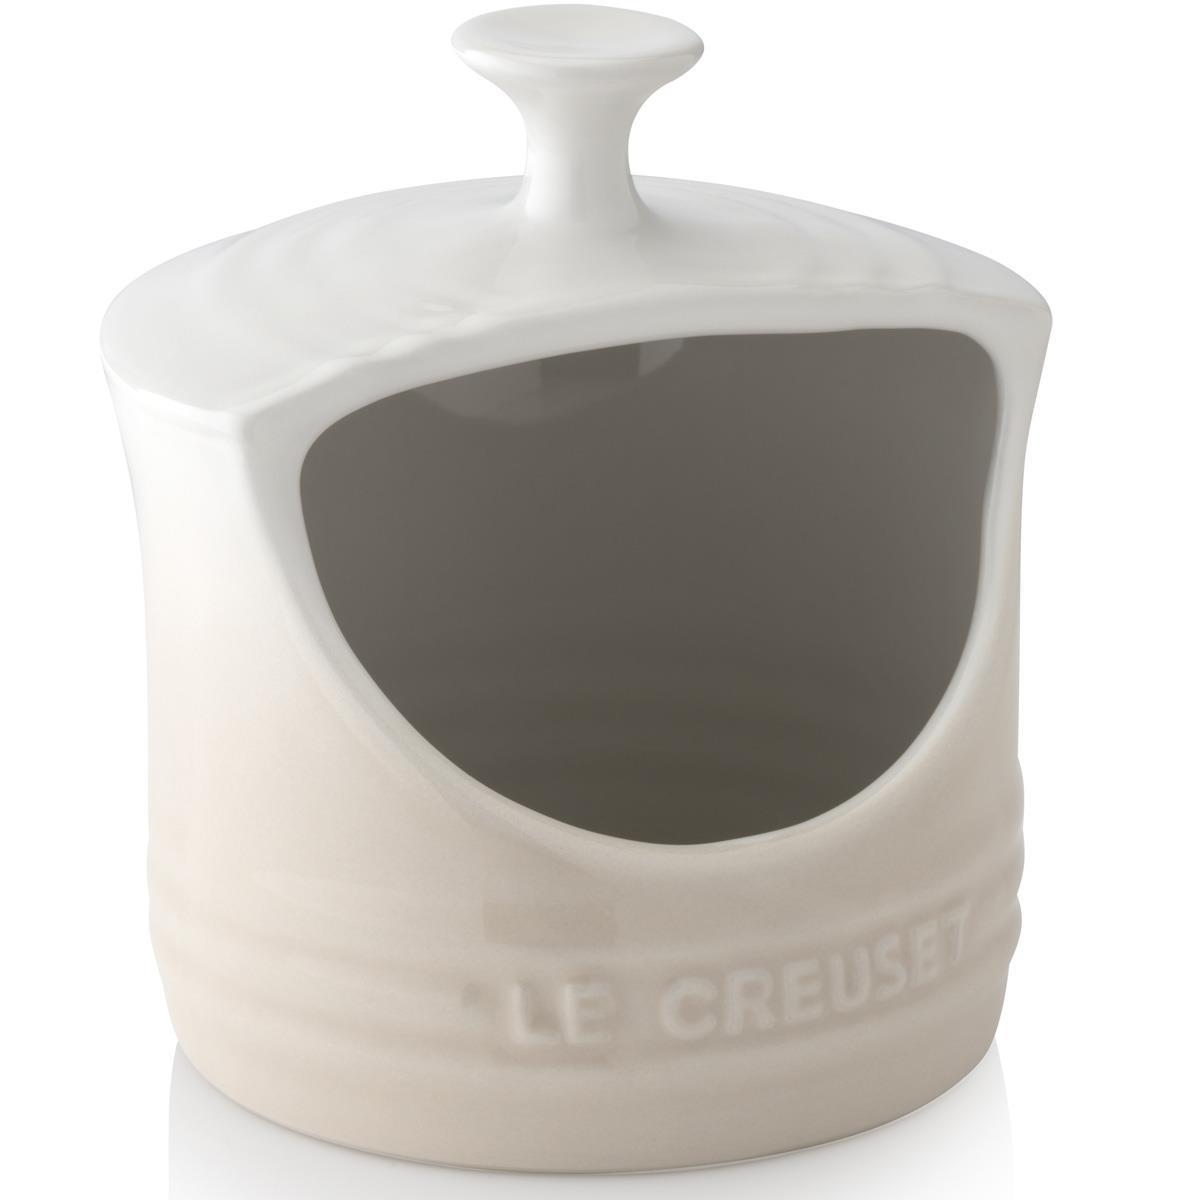 What is the le creuset salt pig's PM Ref (Product Management Reference)?